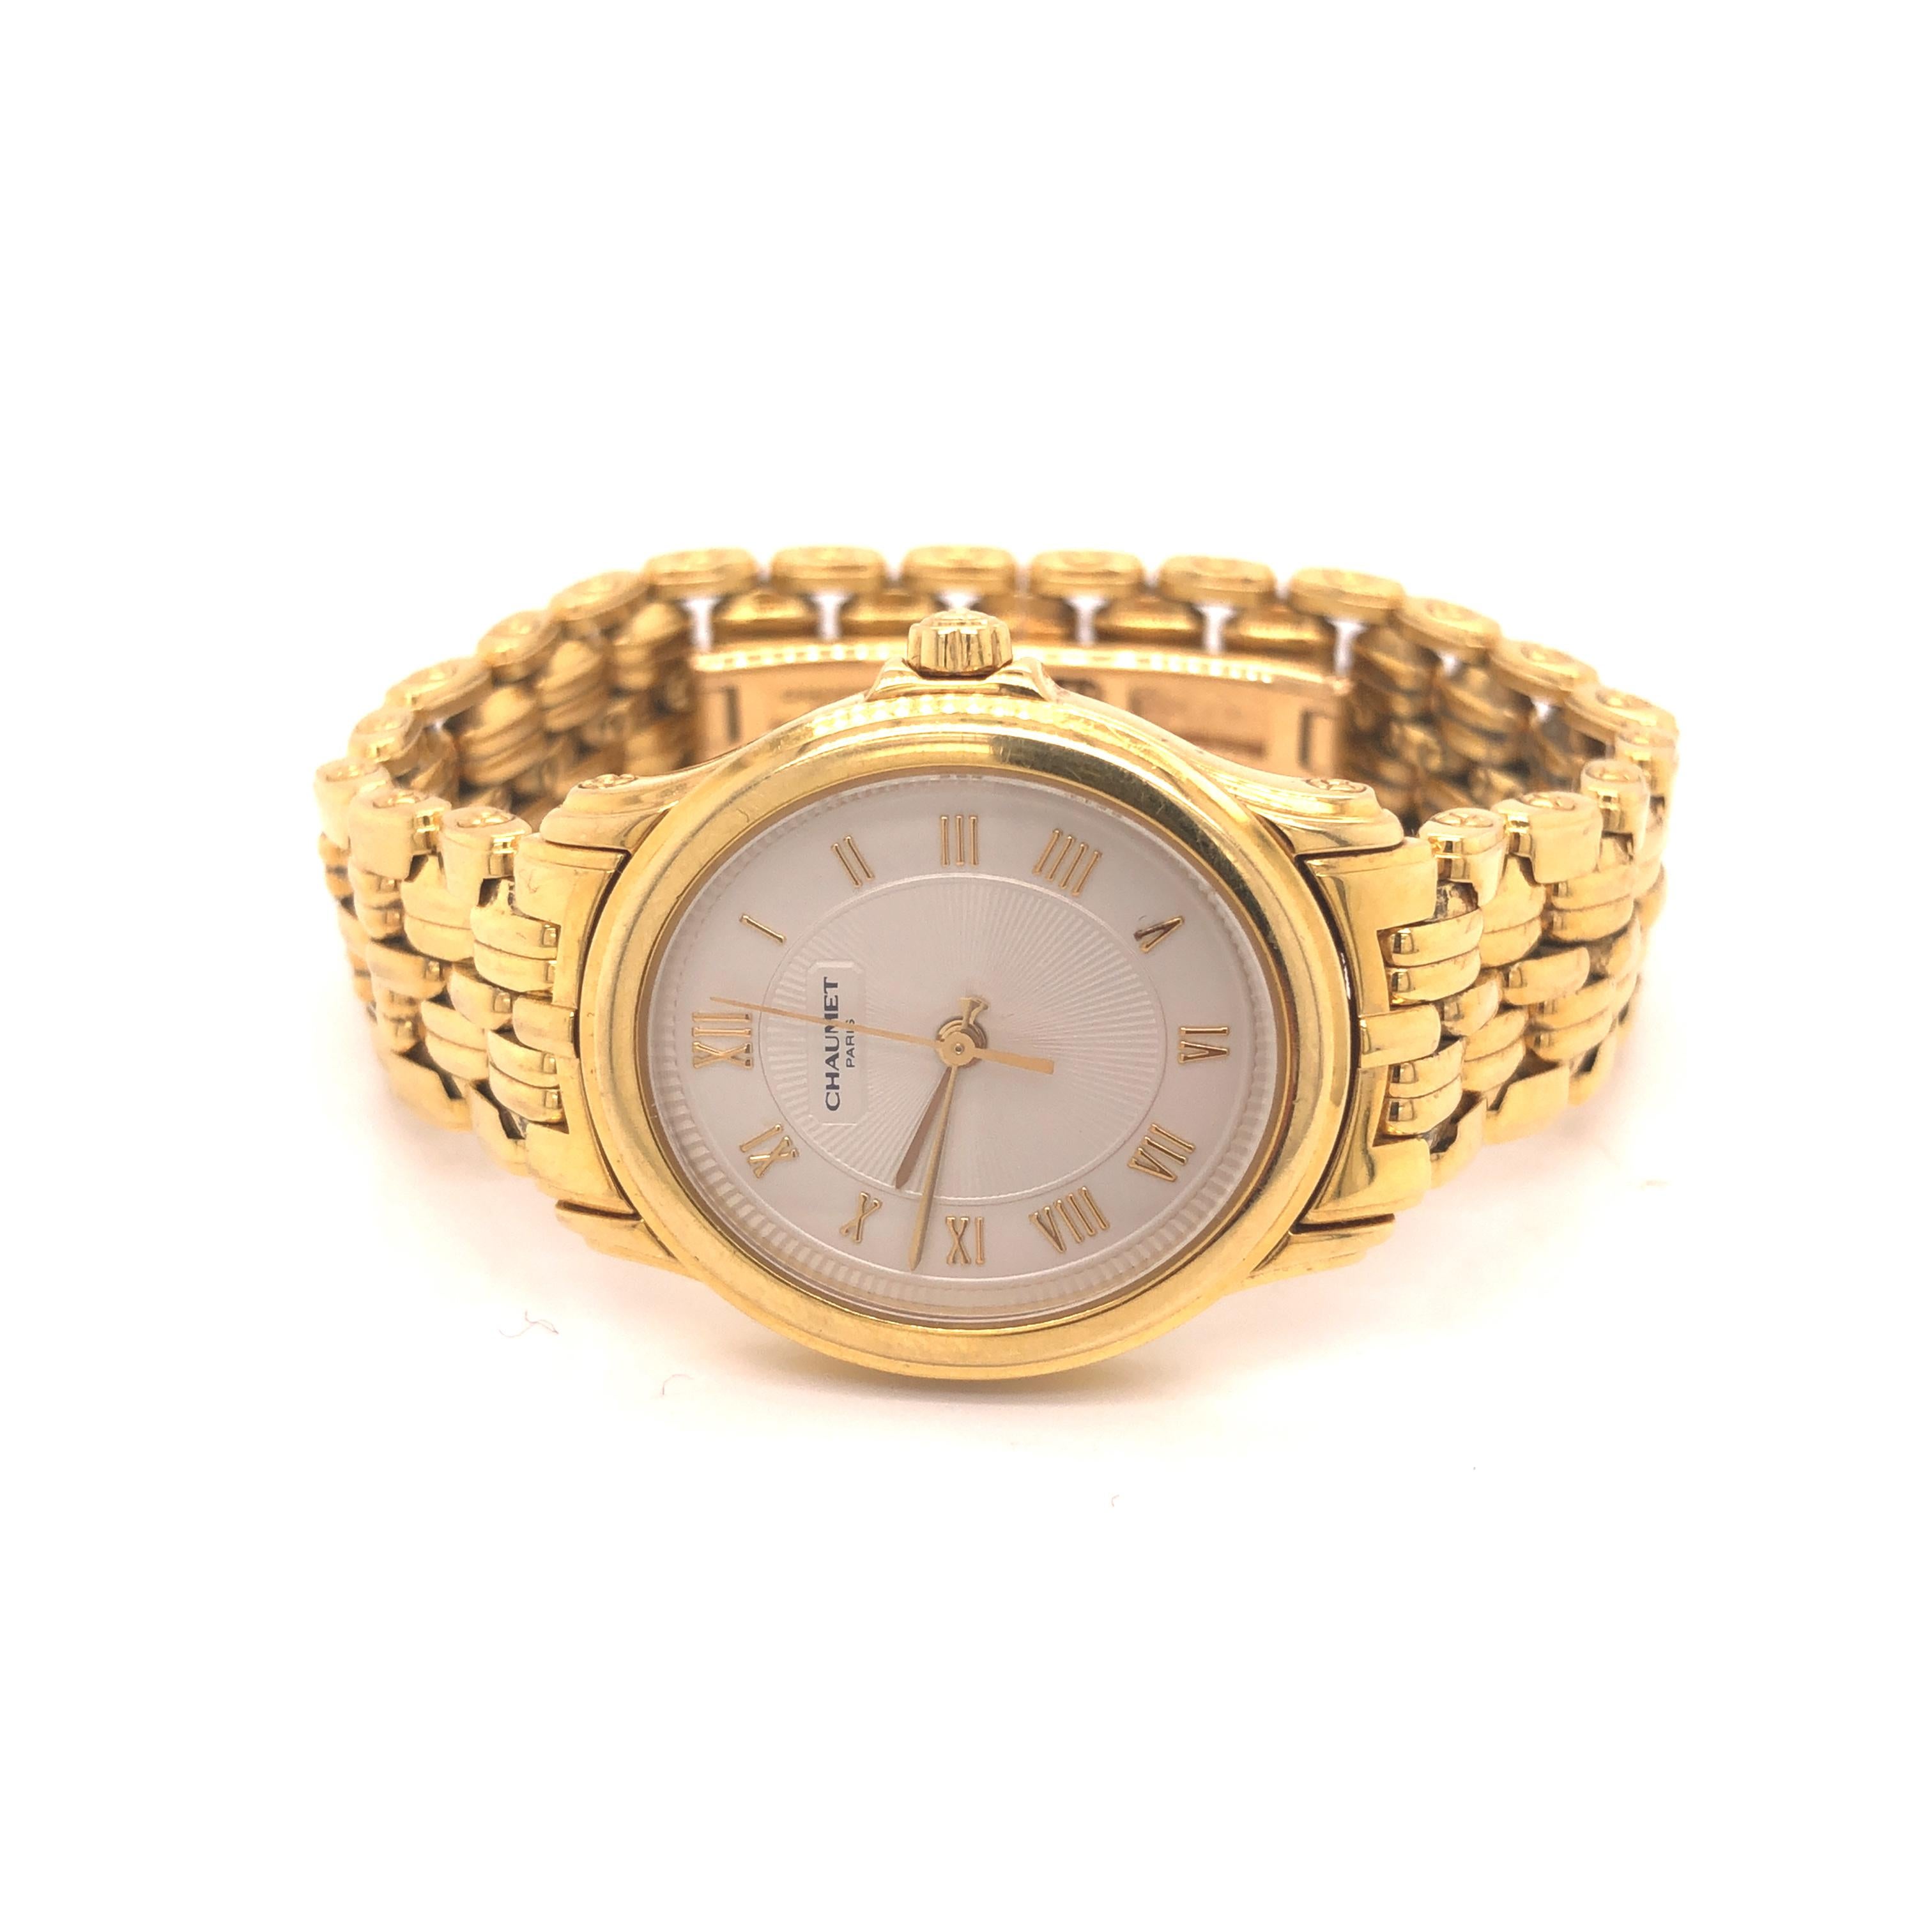 Chaumet Paris 18K Yellow Gold Roman Numerals Ladies Watch. The face of the watch measures 1 1/8